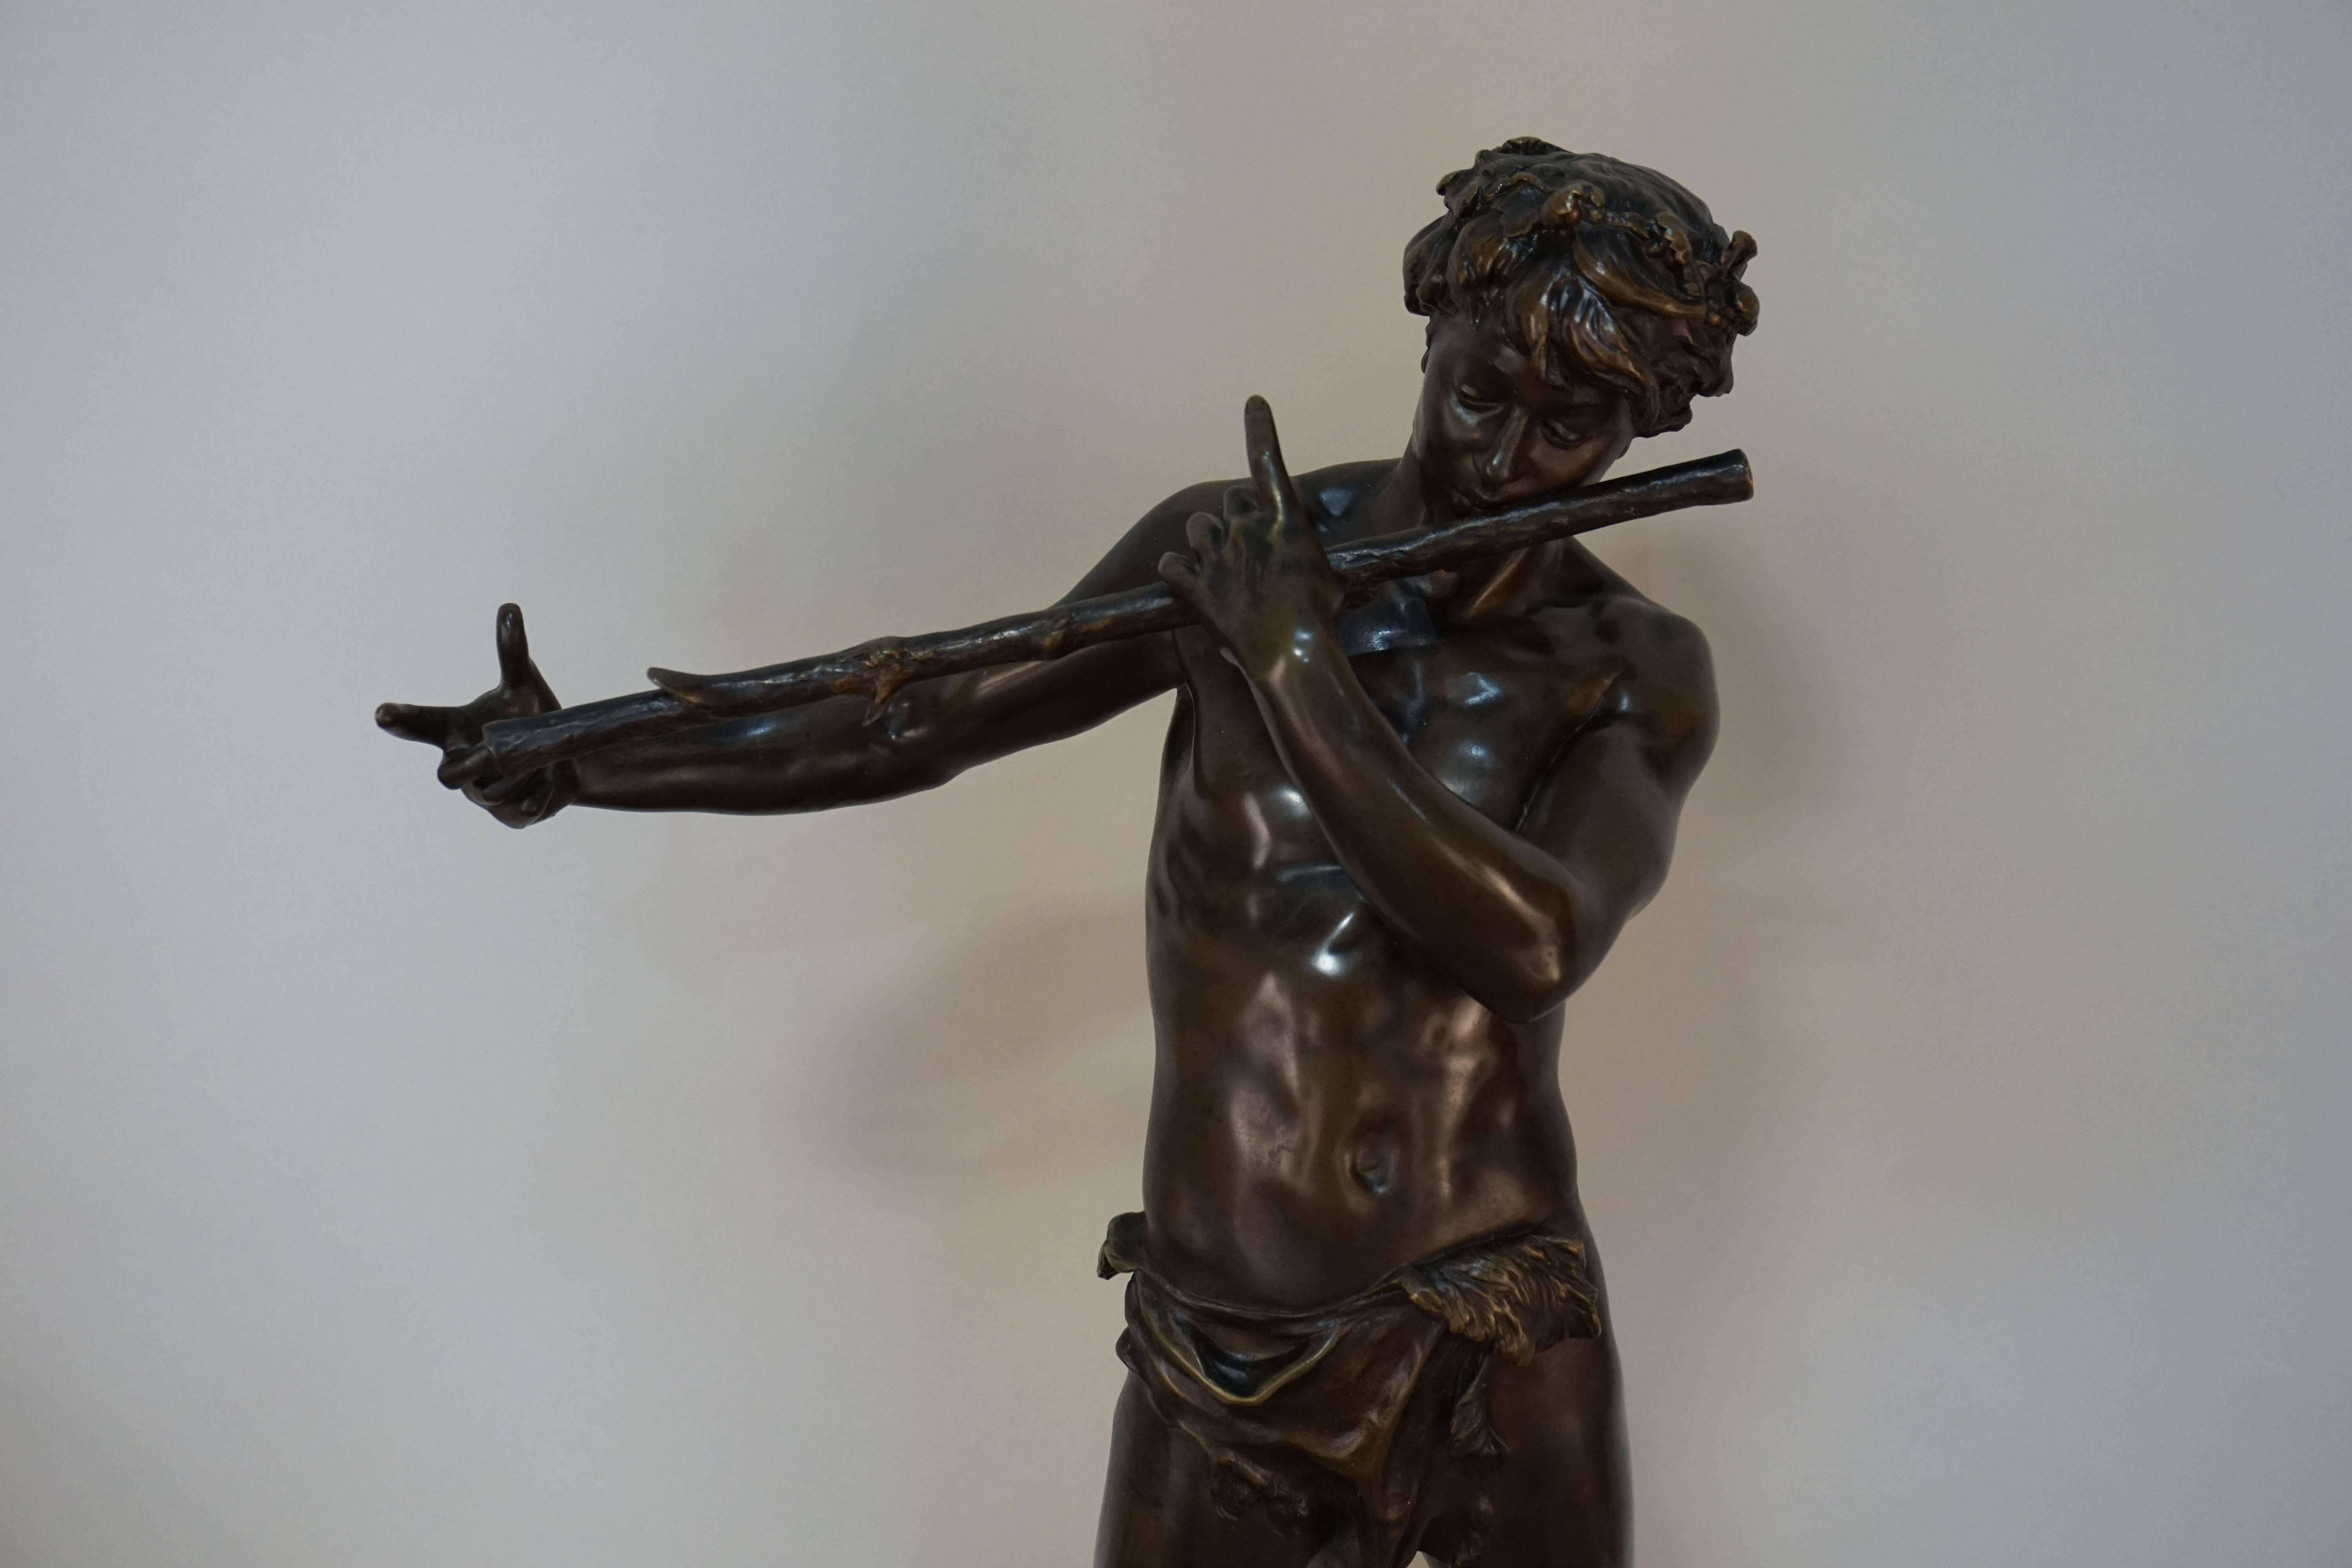 An exceptional early 20th century bronze, pan playing flute by Felix Maurice Charpentier (1858-1924).